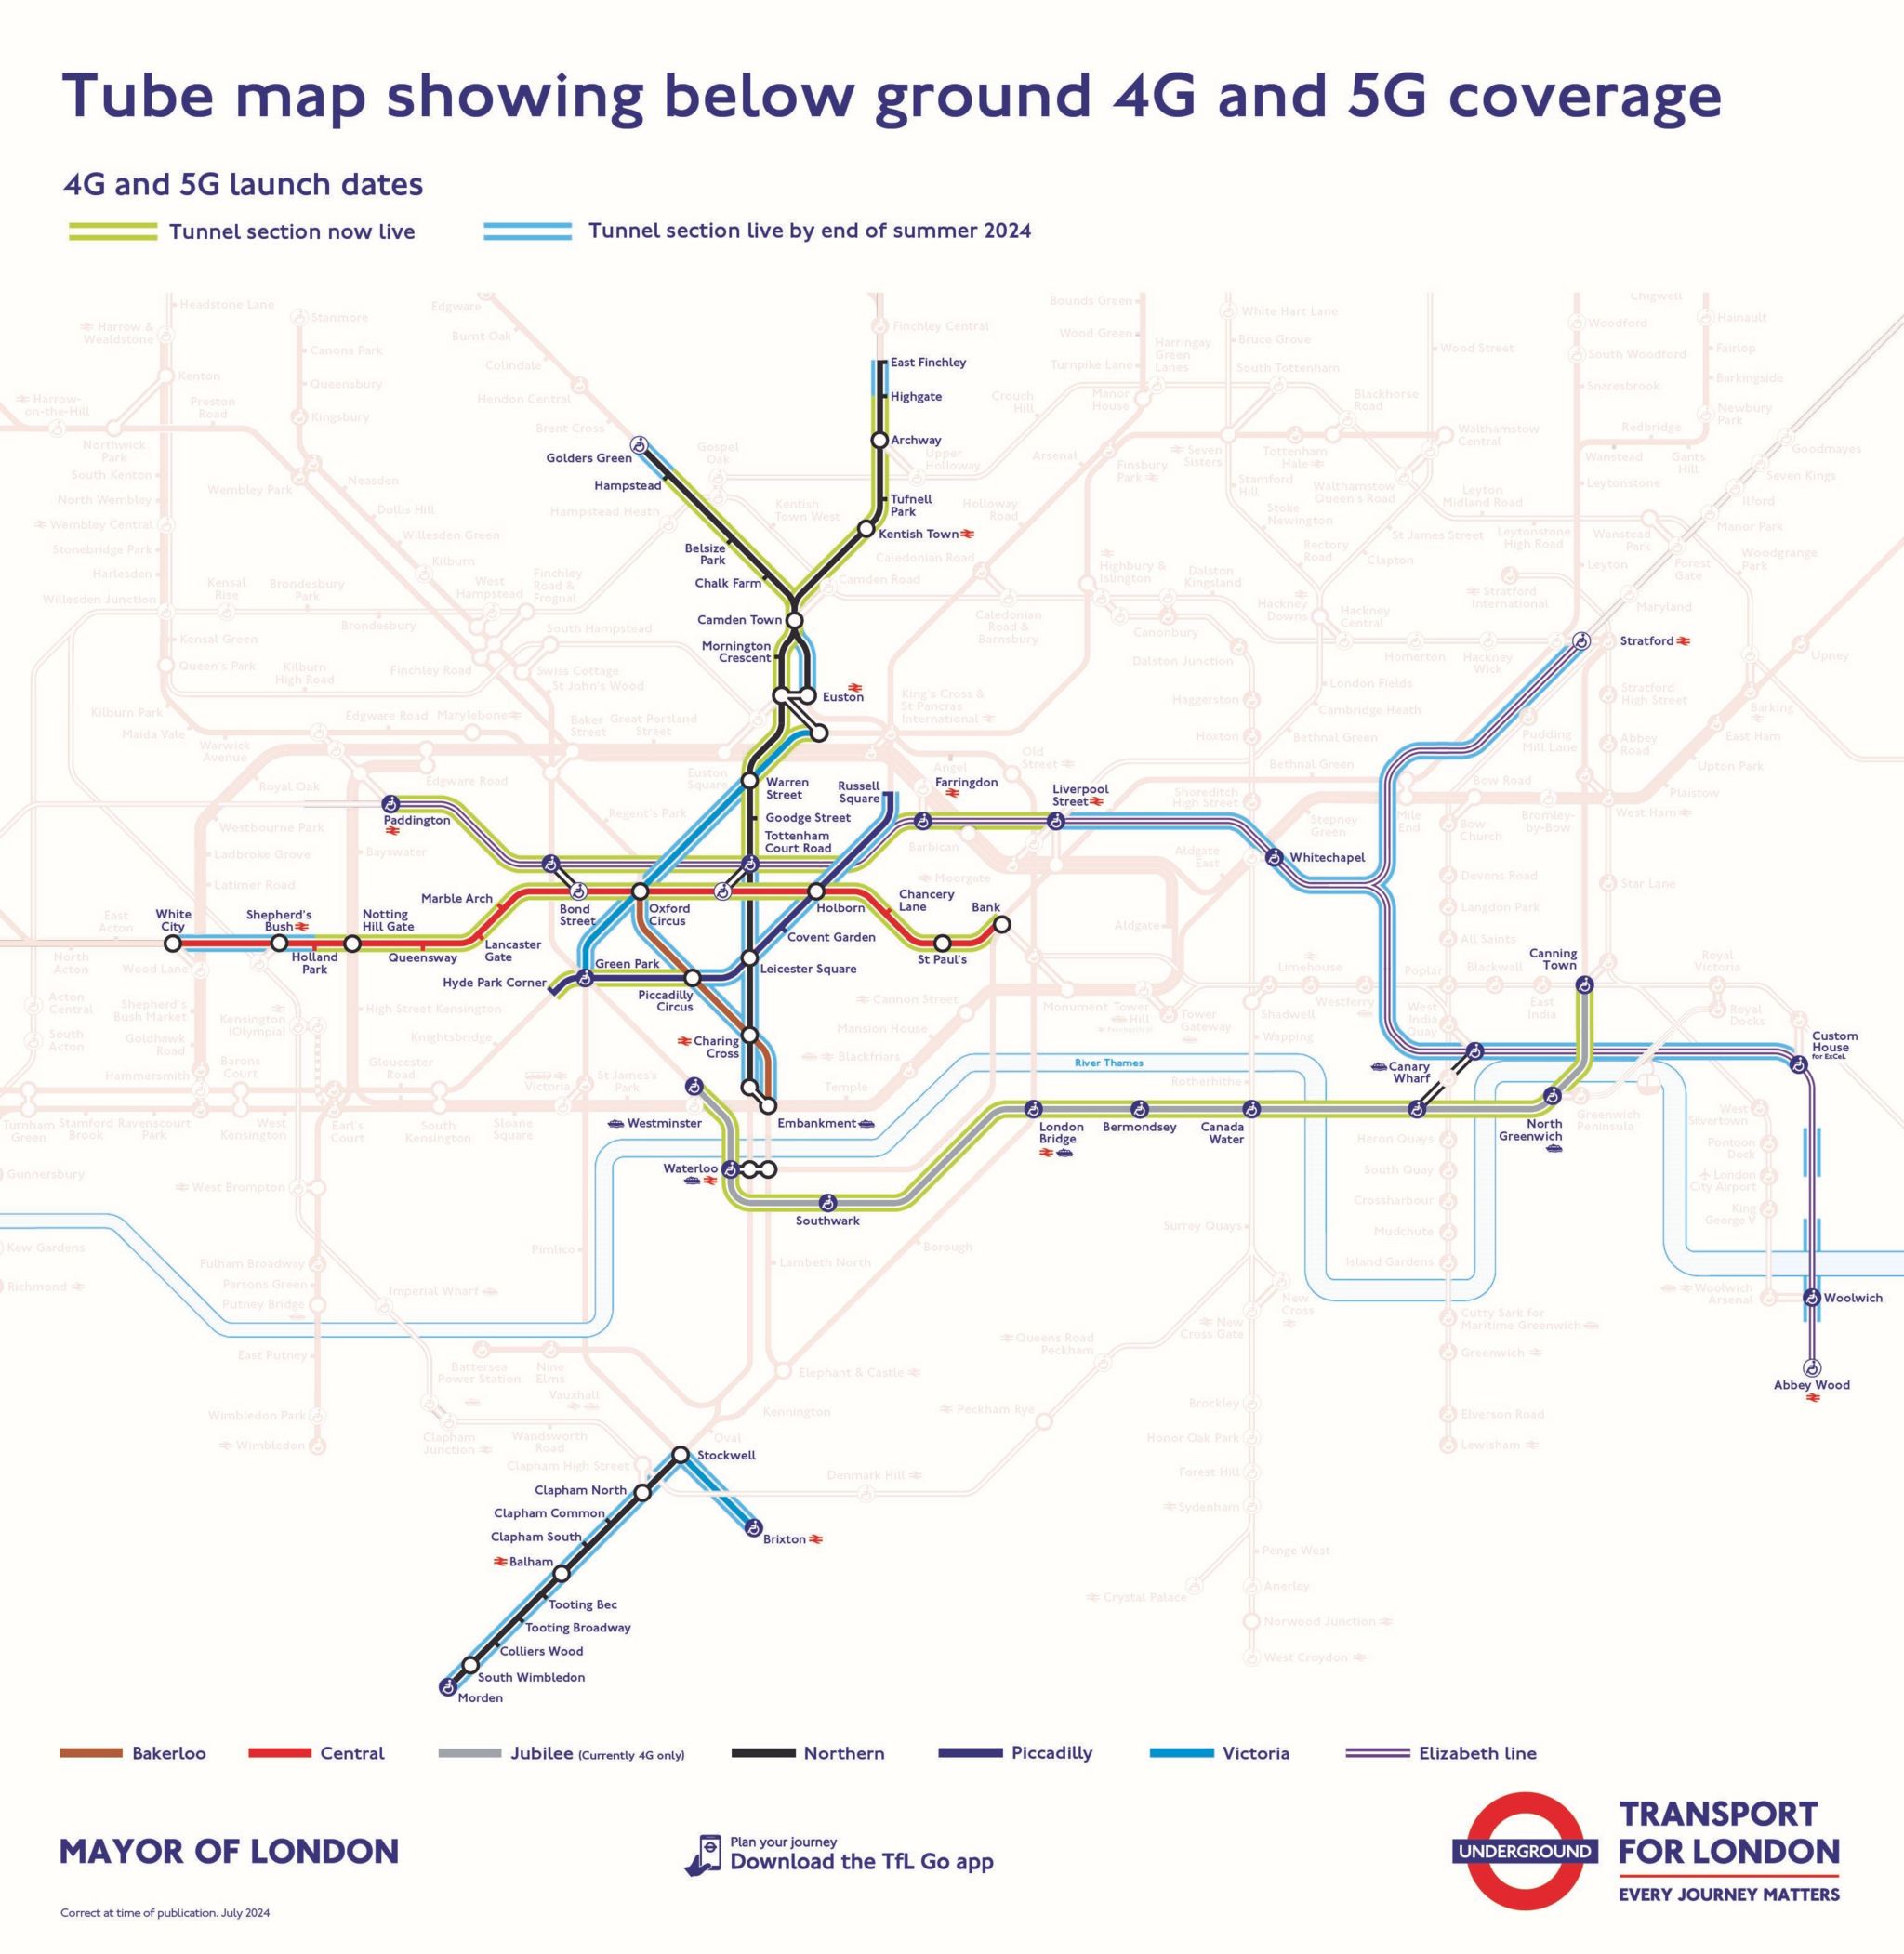 Tube map showing below ground 4G and 5G coverage